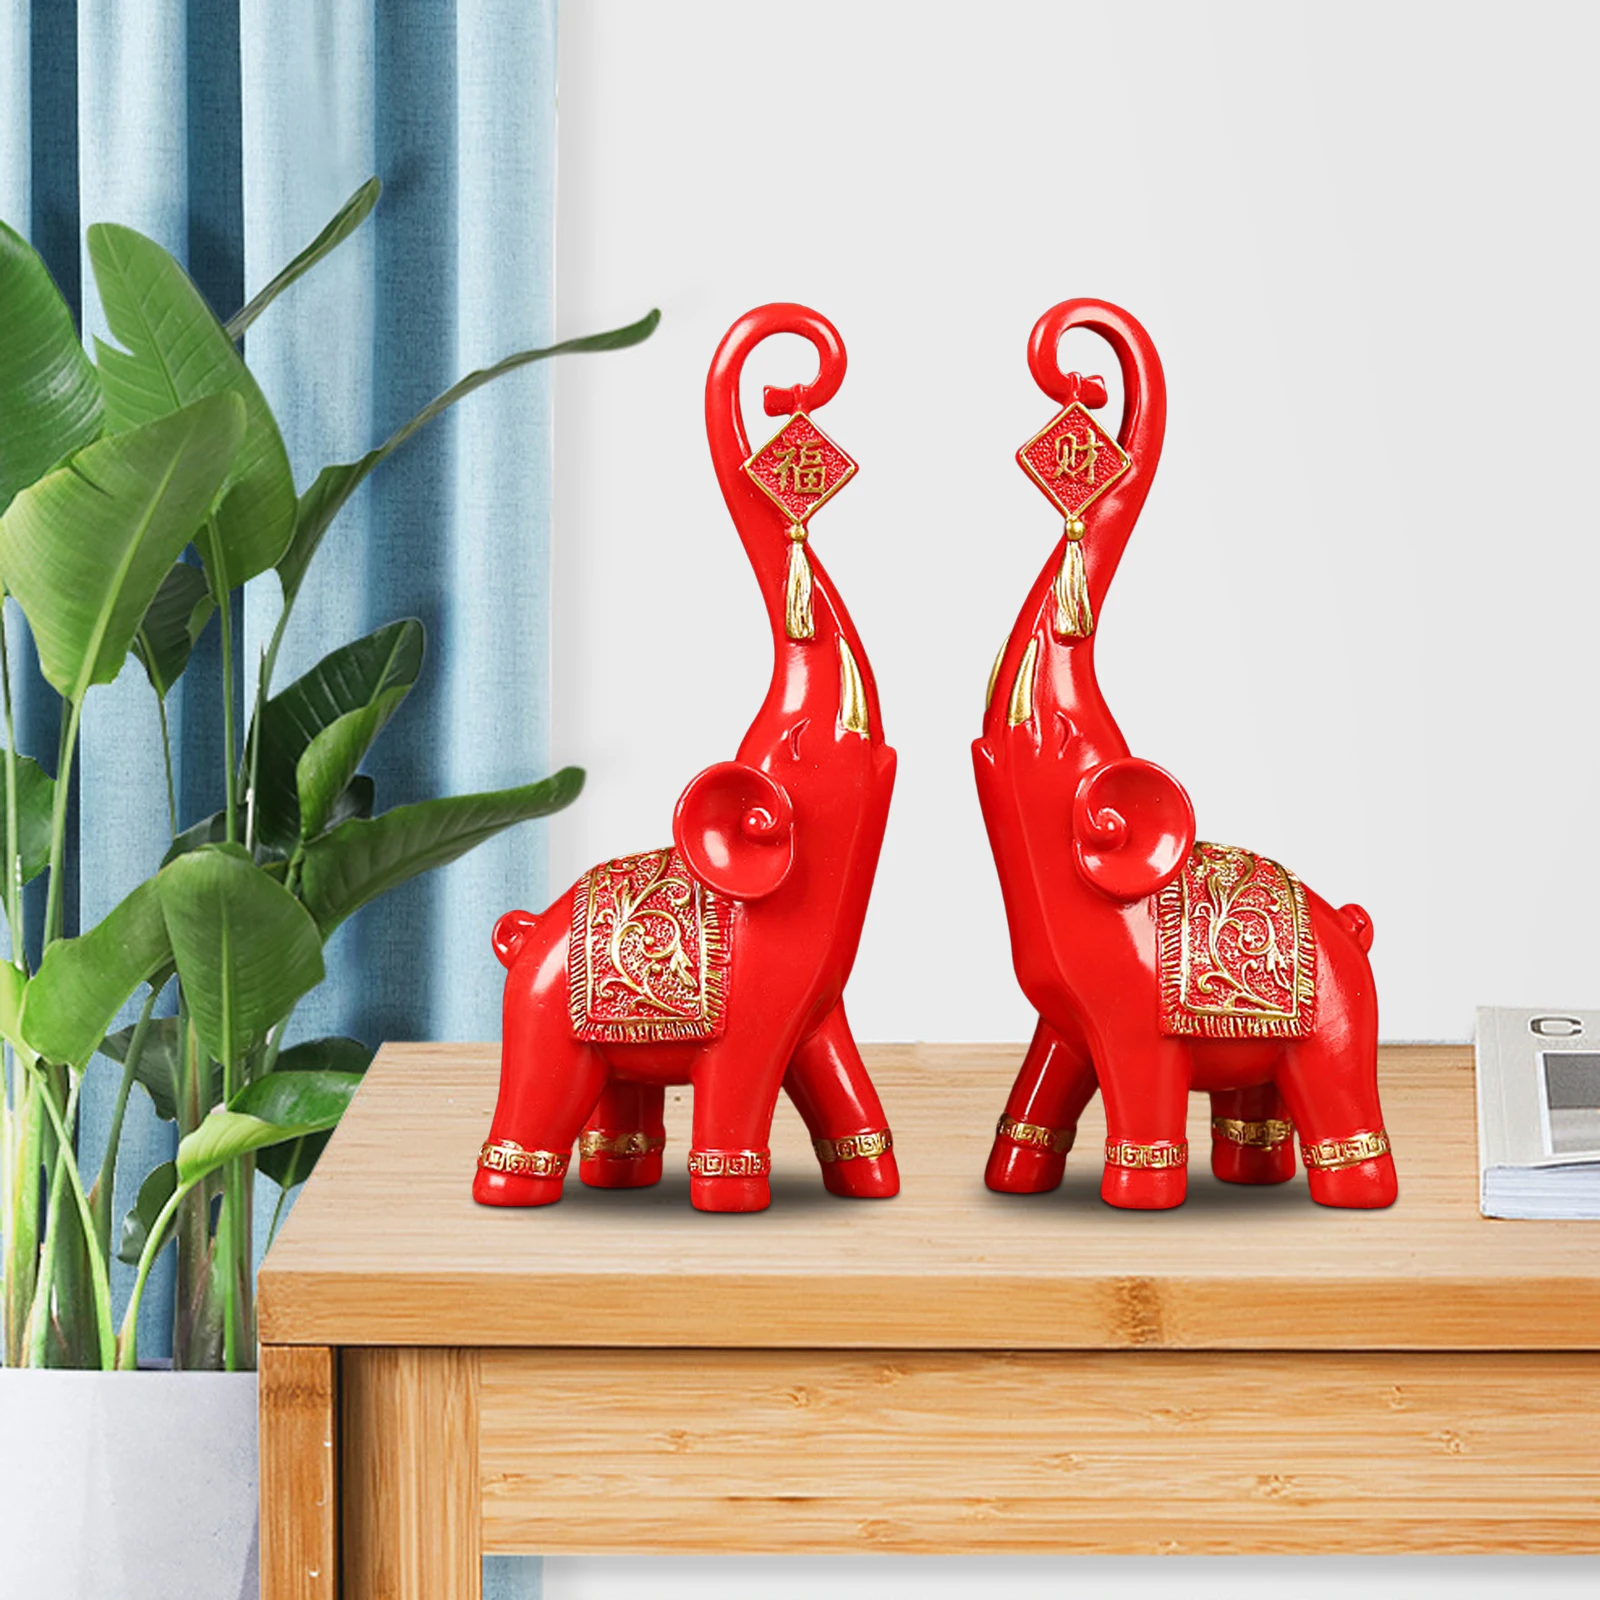 2Pcs Nordic Style Resin Elephant Statues Animal Sculpture Ornaments for Home Office Decoration Dorm Desktop Decor Birthday Gift